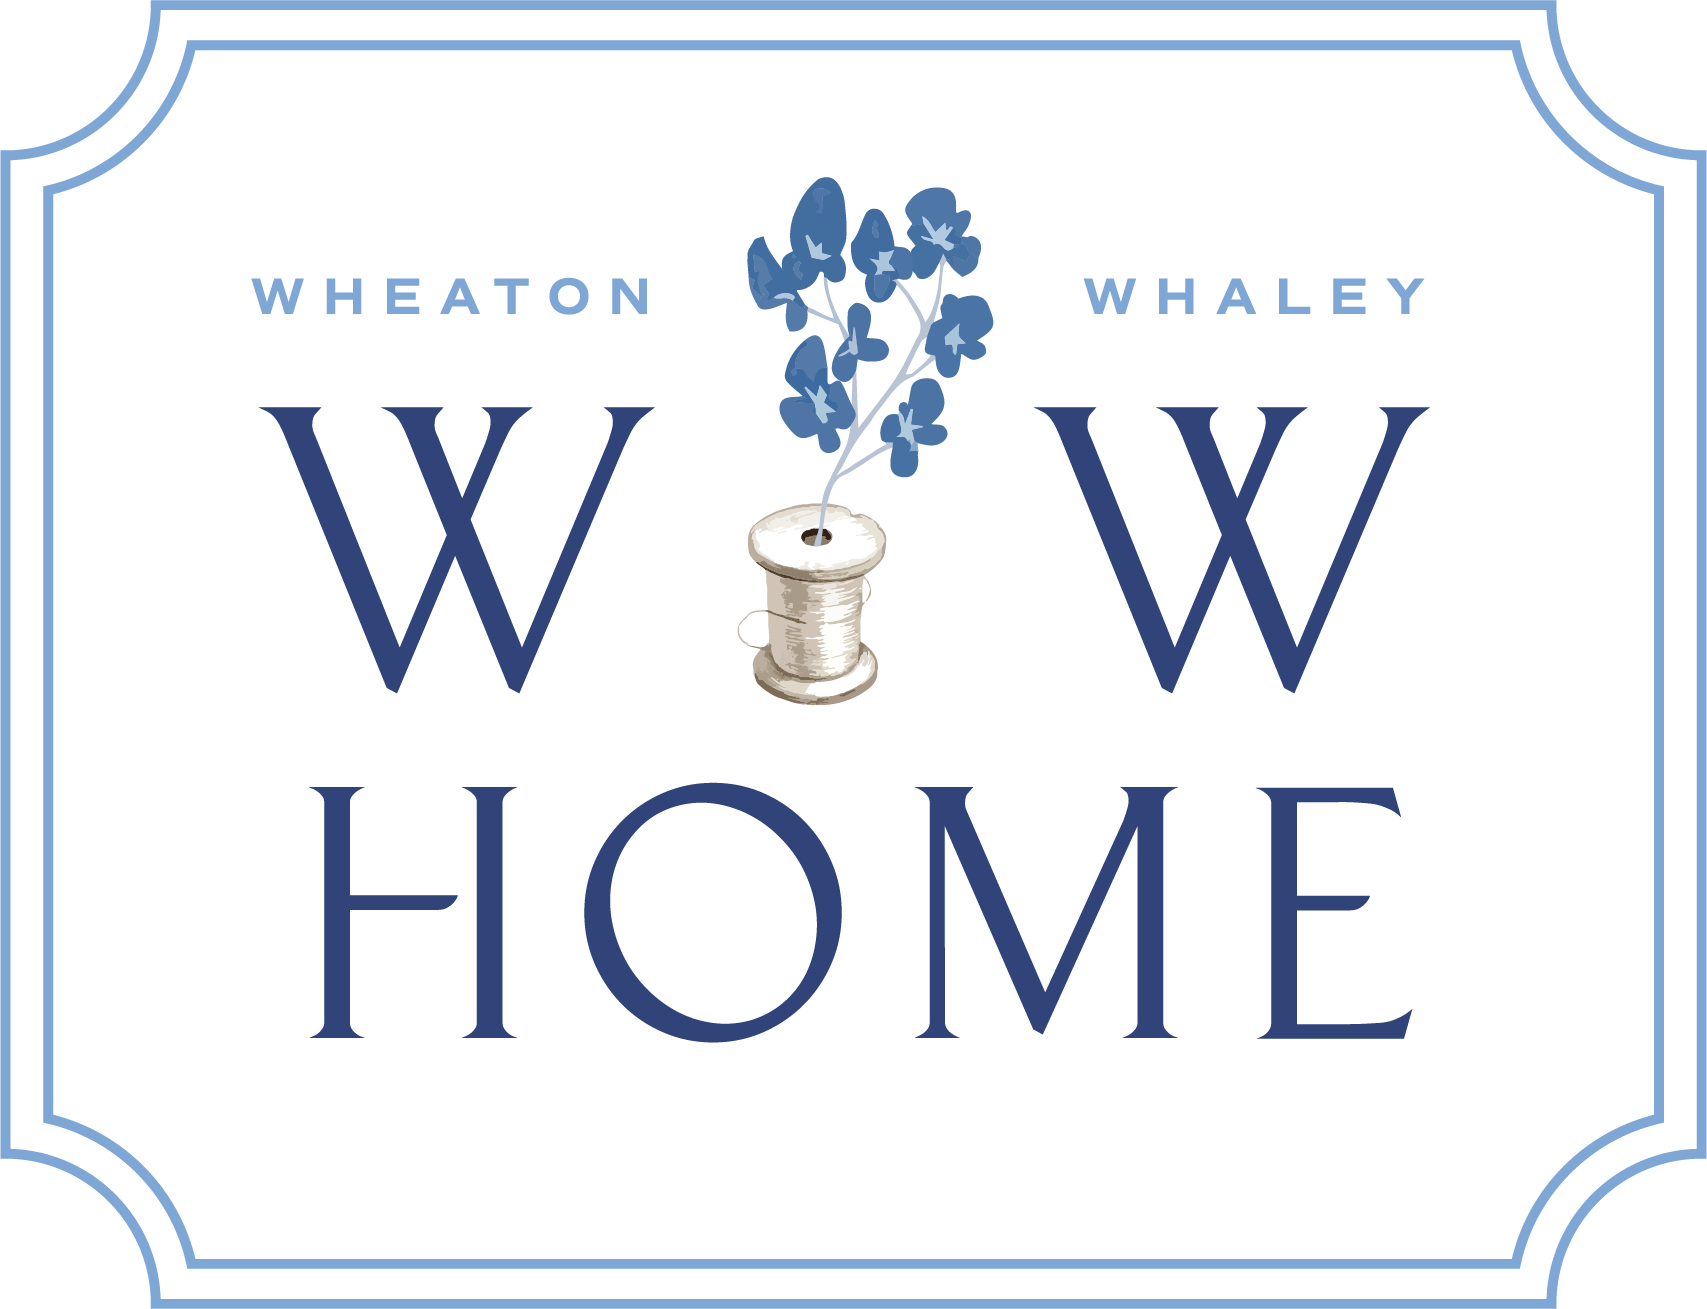 Wheaton Whaley Home - designer curated pillow, drape and bedding combinations